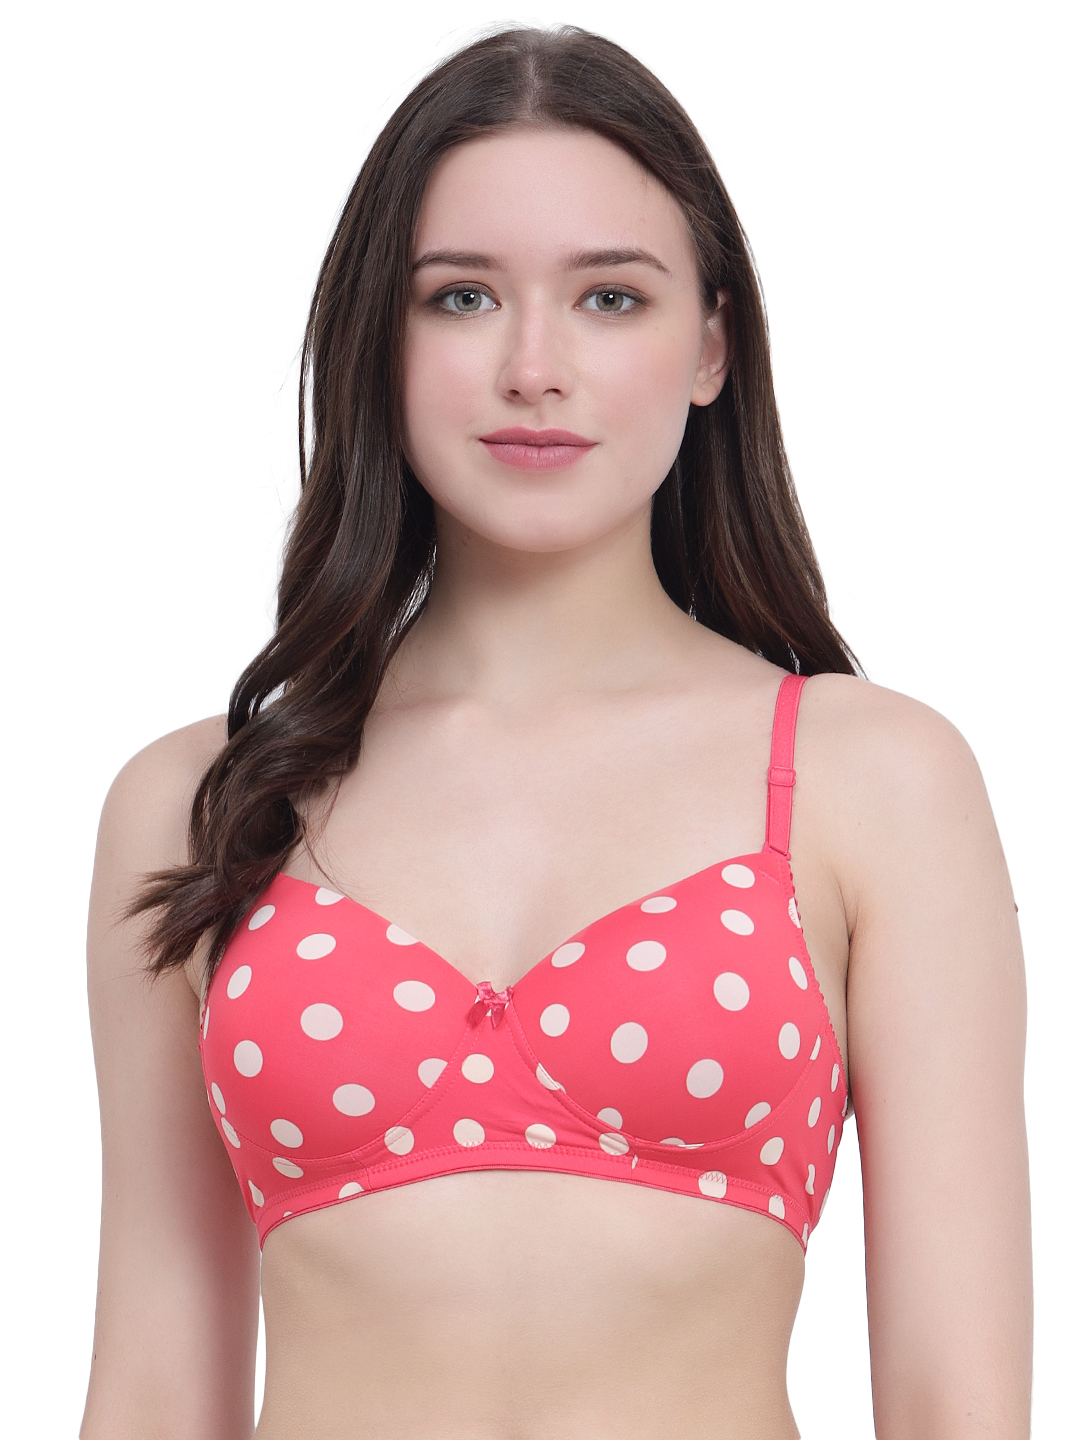 Trendy Red Padded Bra With White Polka Dots